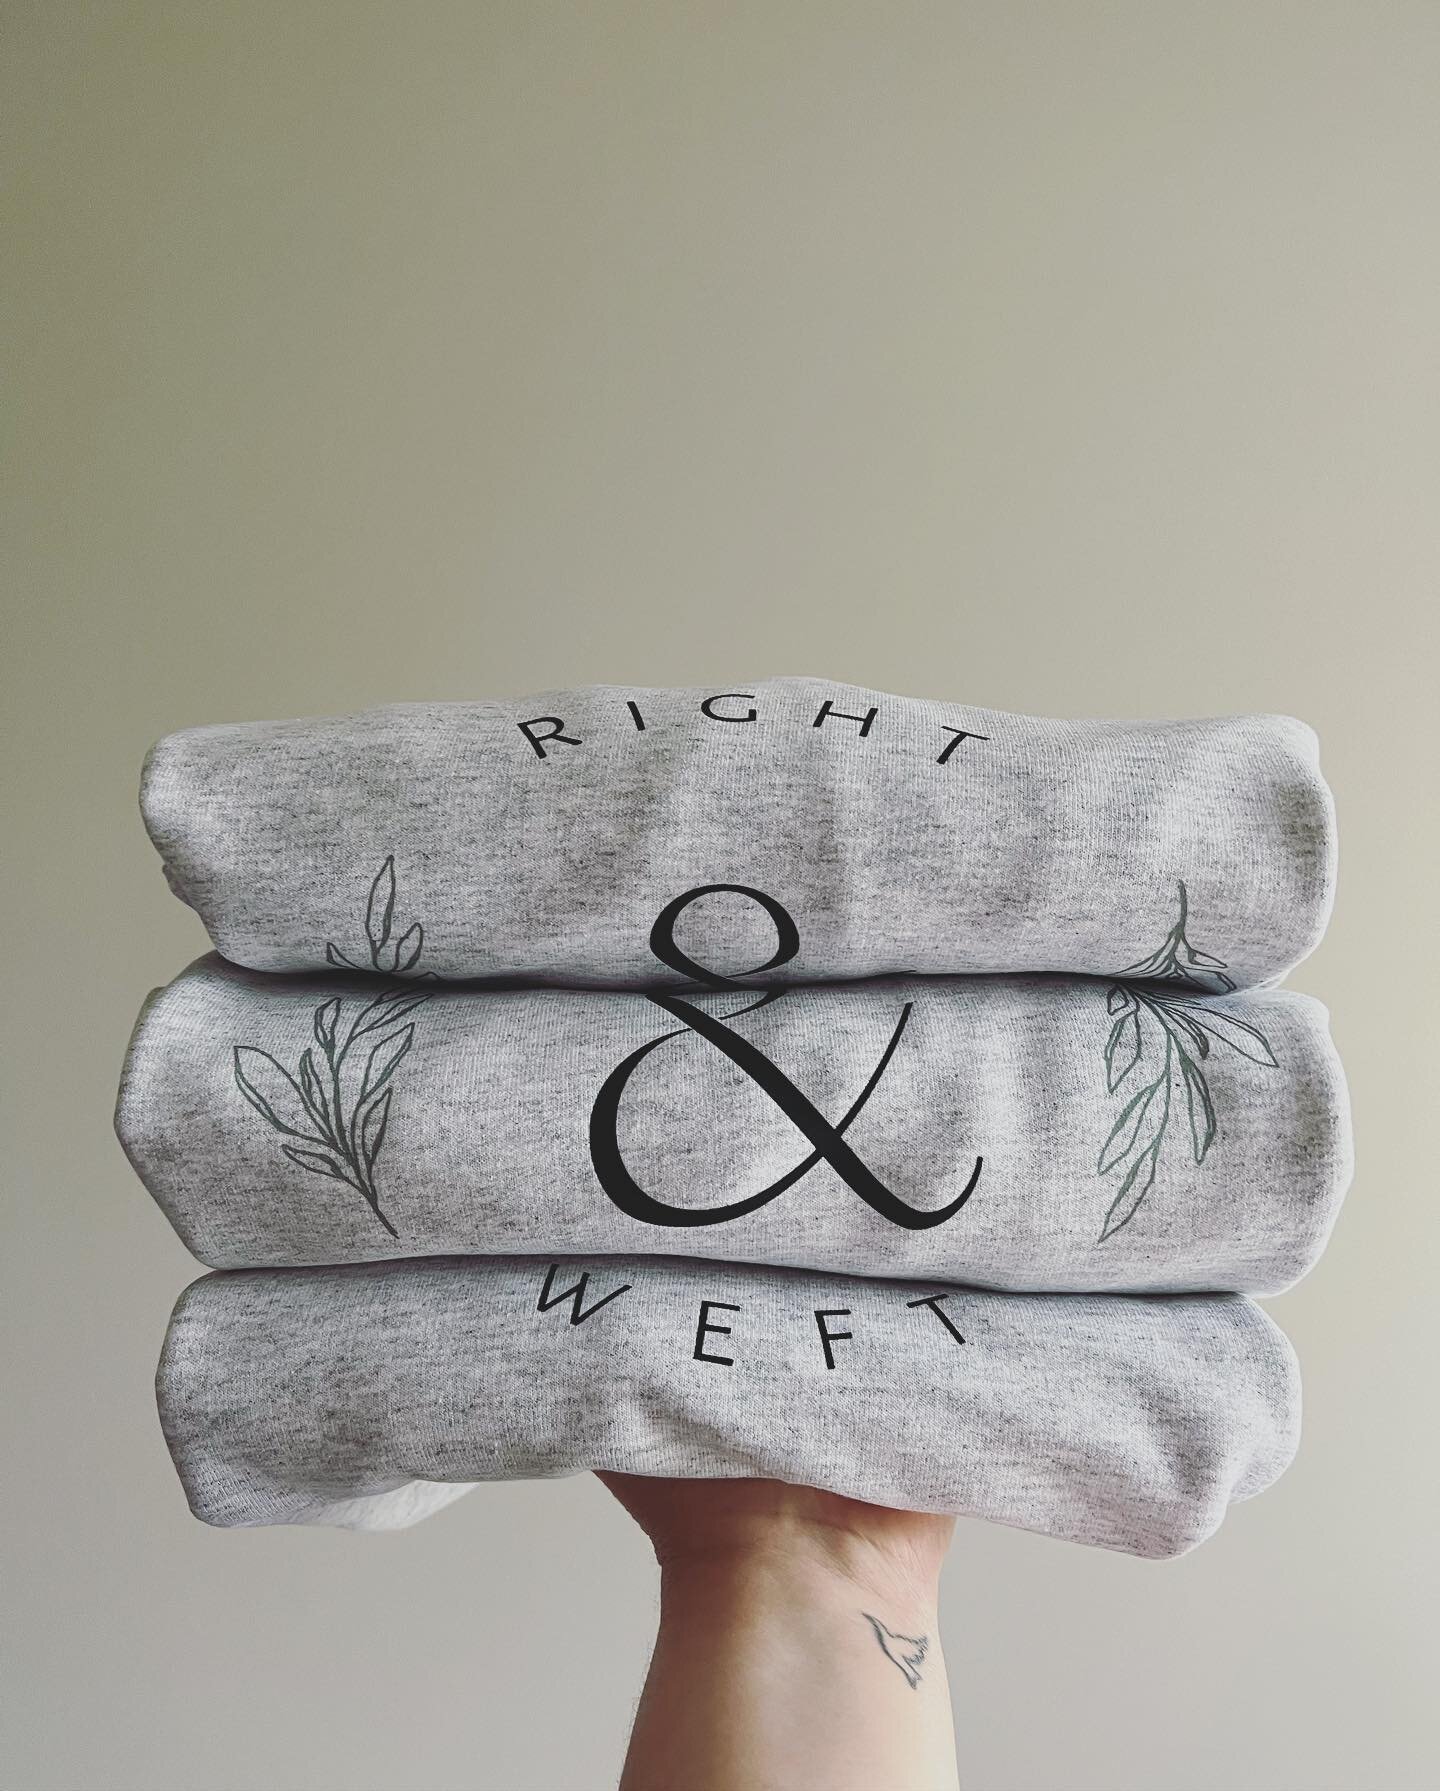 I can&rsquo;t believe I never posted these! Check out these beautiful crewnecks I made for my friend Anna @rightandweft. Her logo is so pretty and delicate! I just saw Anna at a market and she is always wearing her branded apparel - clever marketing 